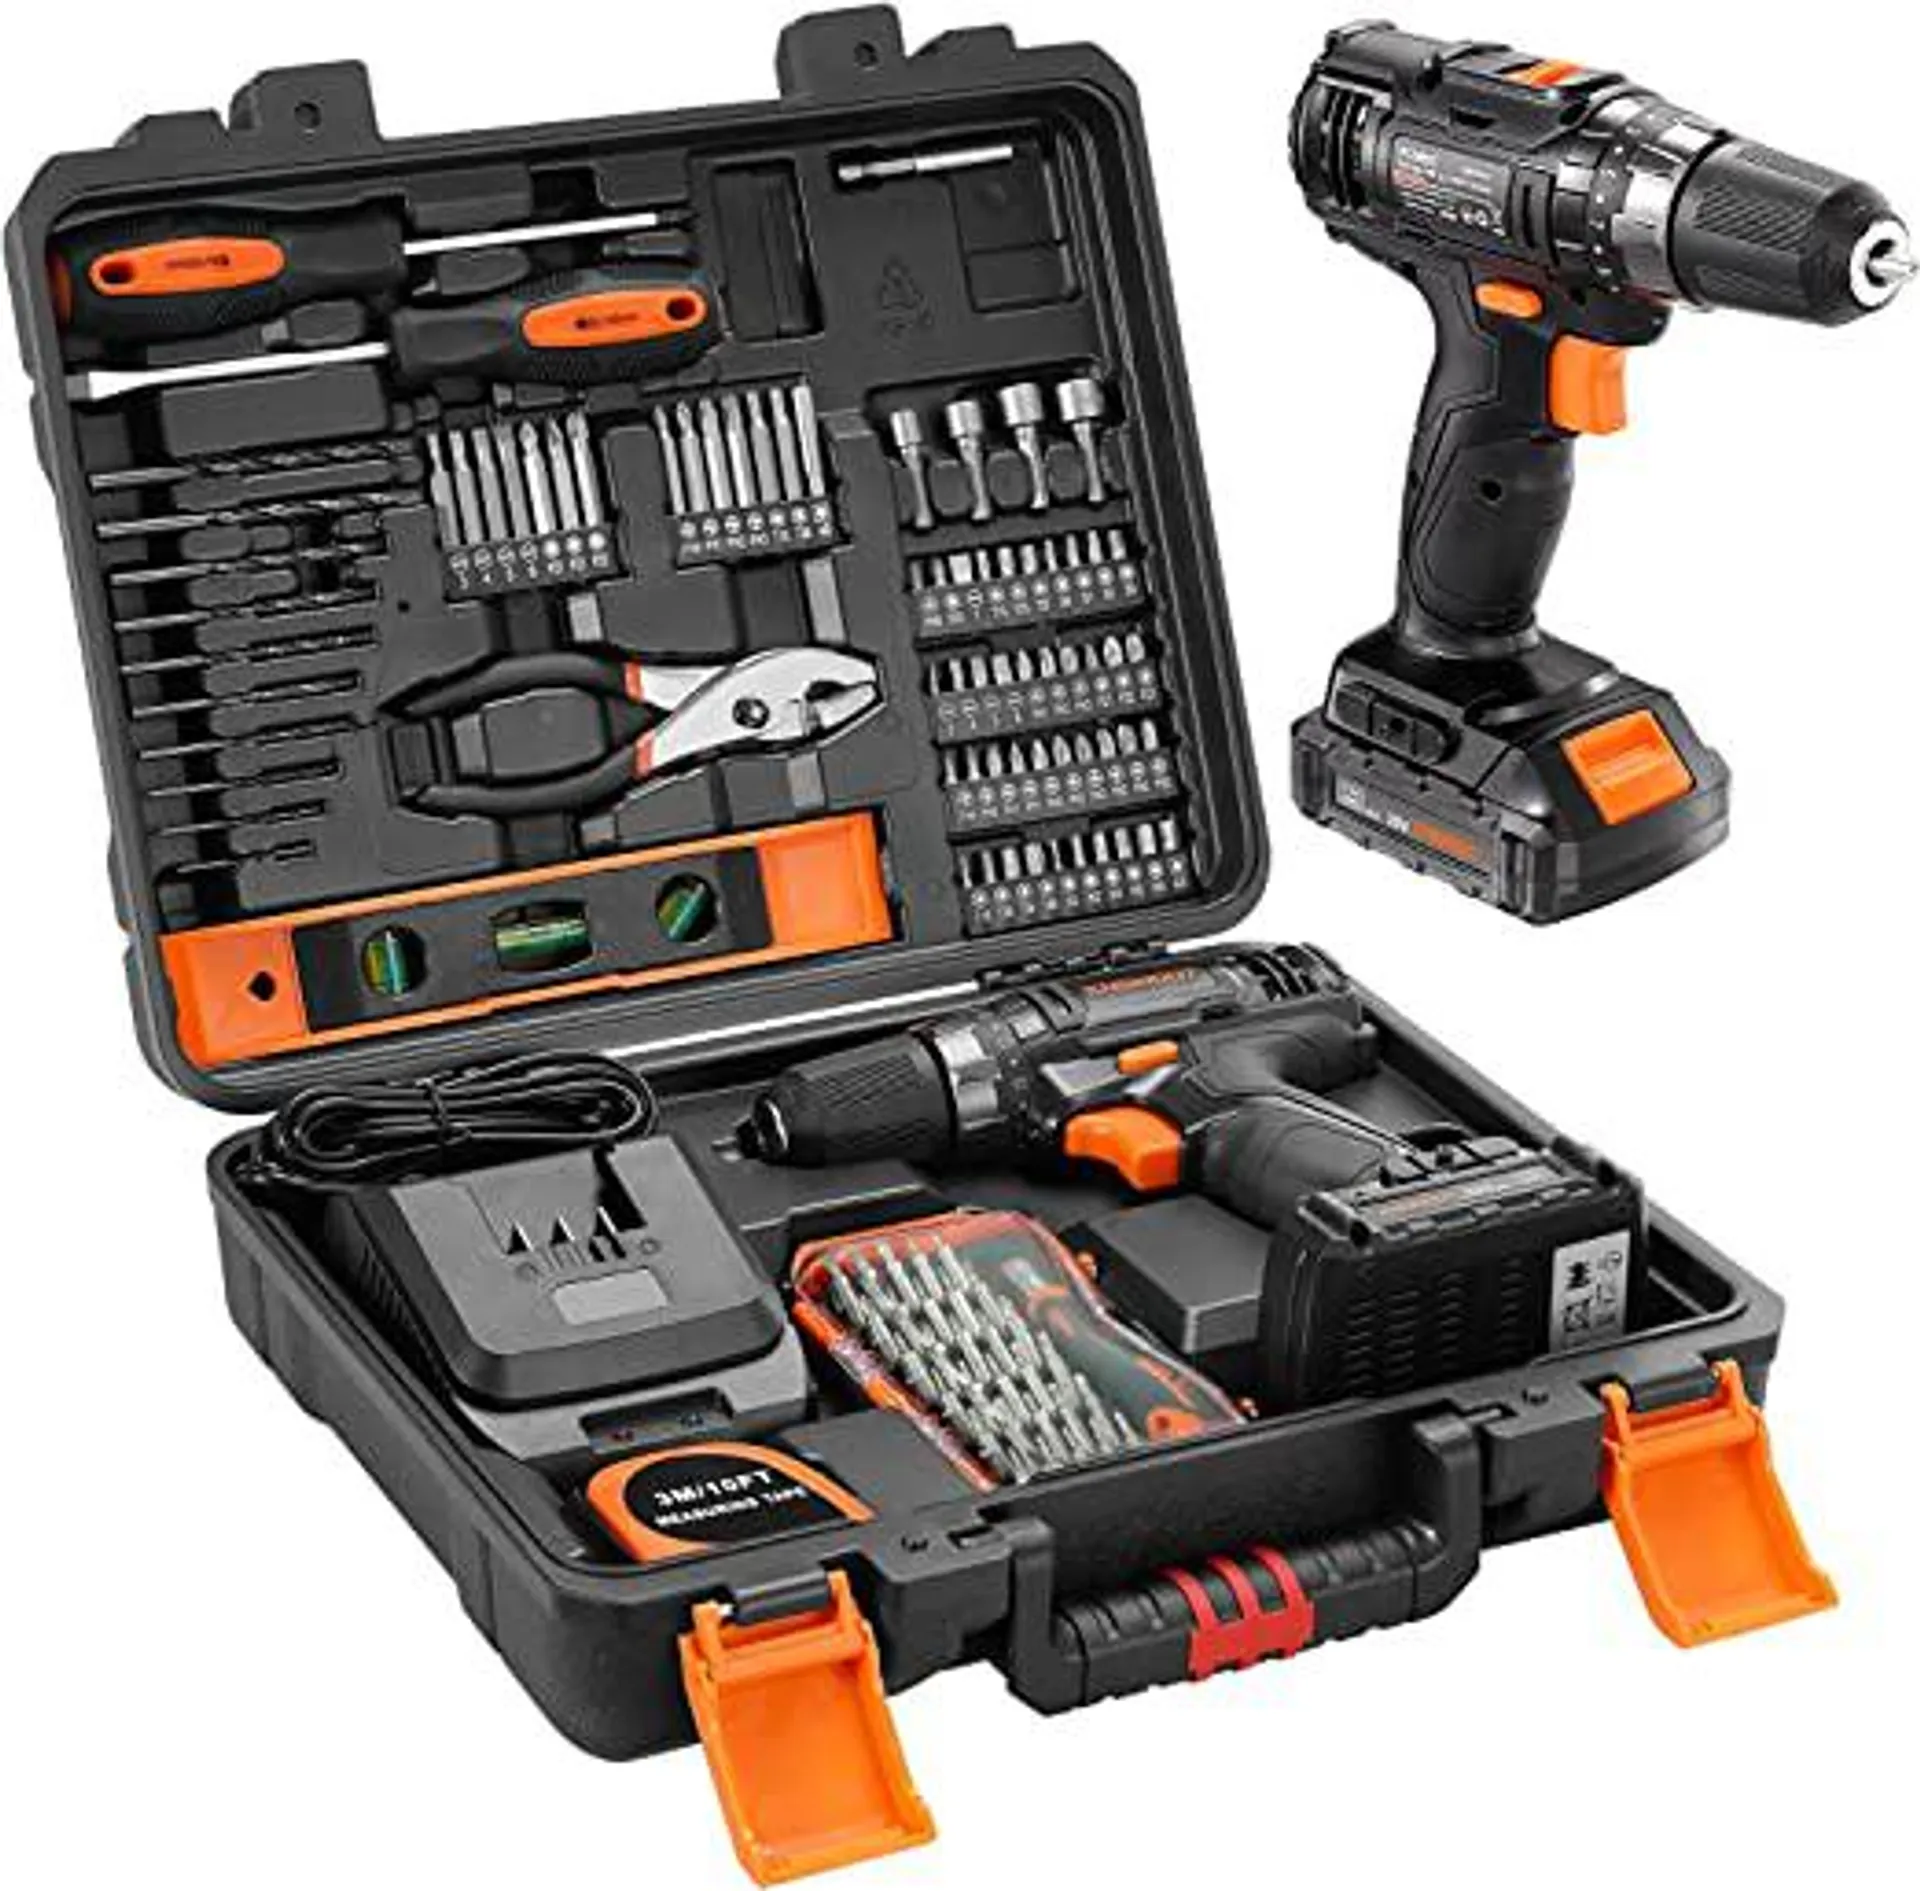 ENGiNDOT Tool Set with Drill, Cordless Drill Tool Kit 108Pcs Household Power Tools Drill Set with 20V Li-Ion Battery & Charger for Home Tool Kit